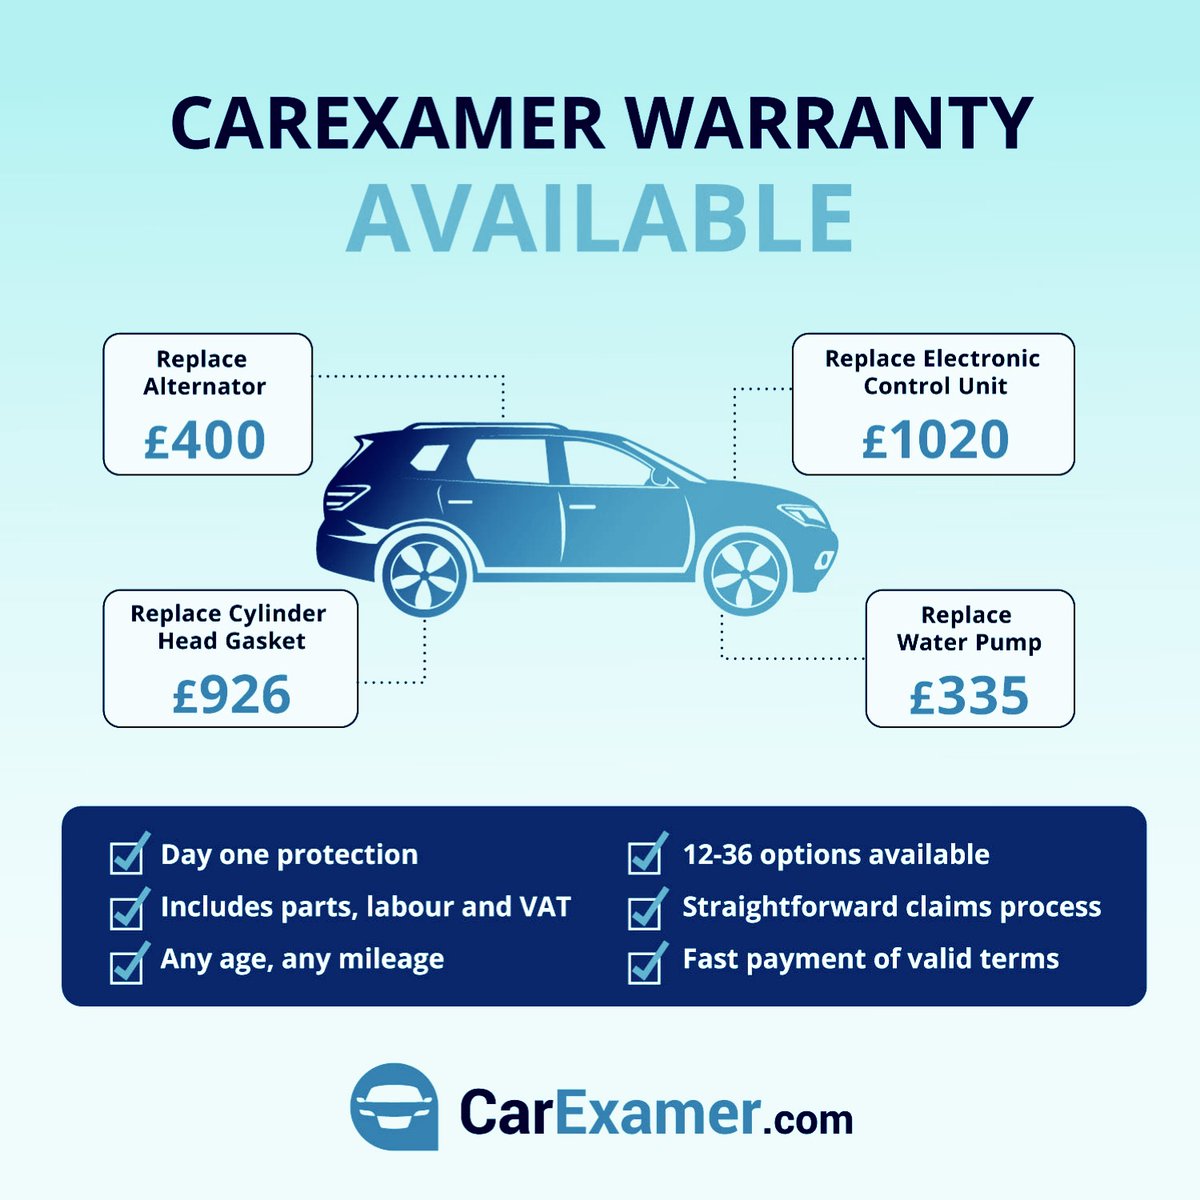 Protect yourself at all time check out the link bellow 👉carexamer.com/extended-warra…

#cars #carbuy #carbuyingmadeeasy